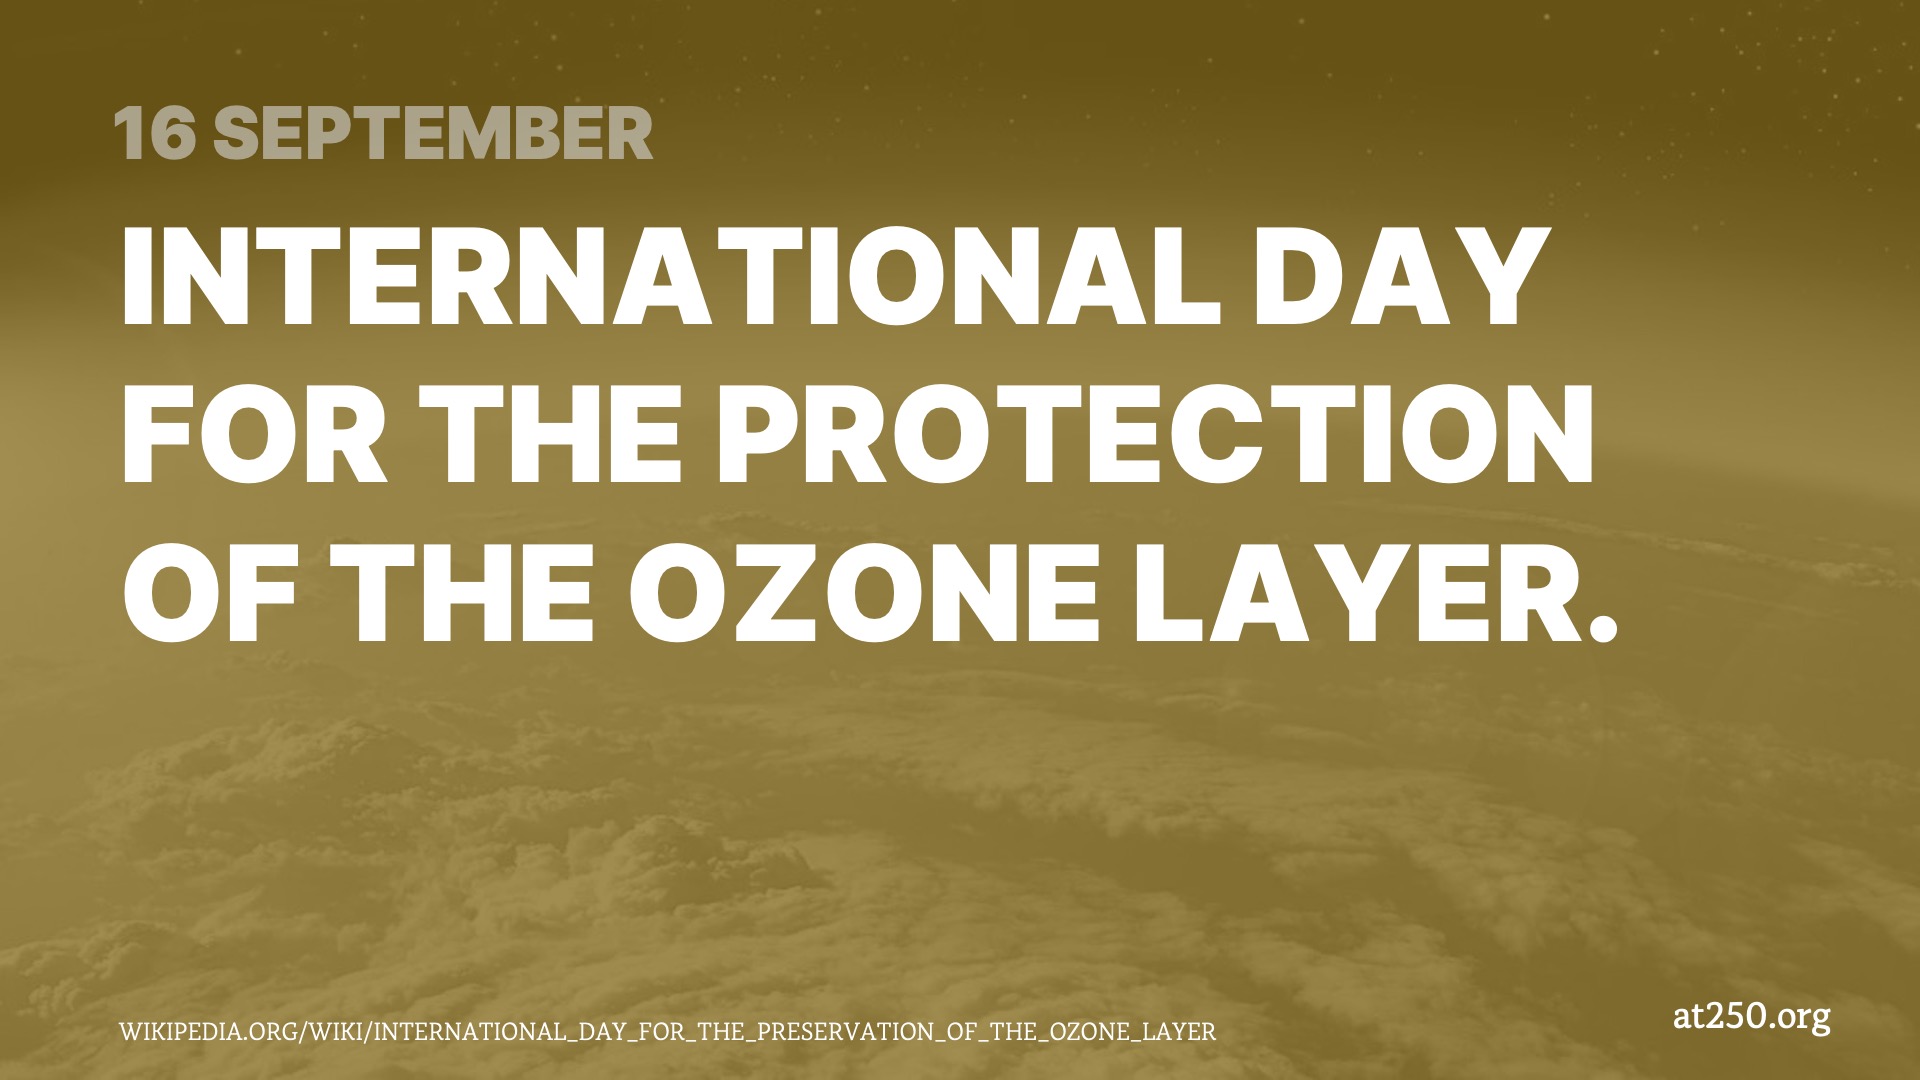 Protect the Ozone